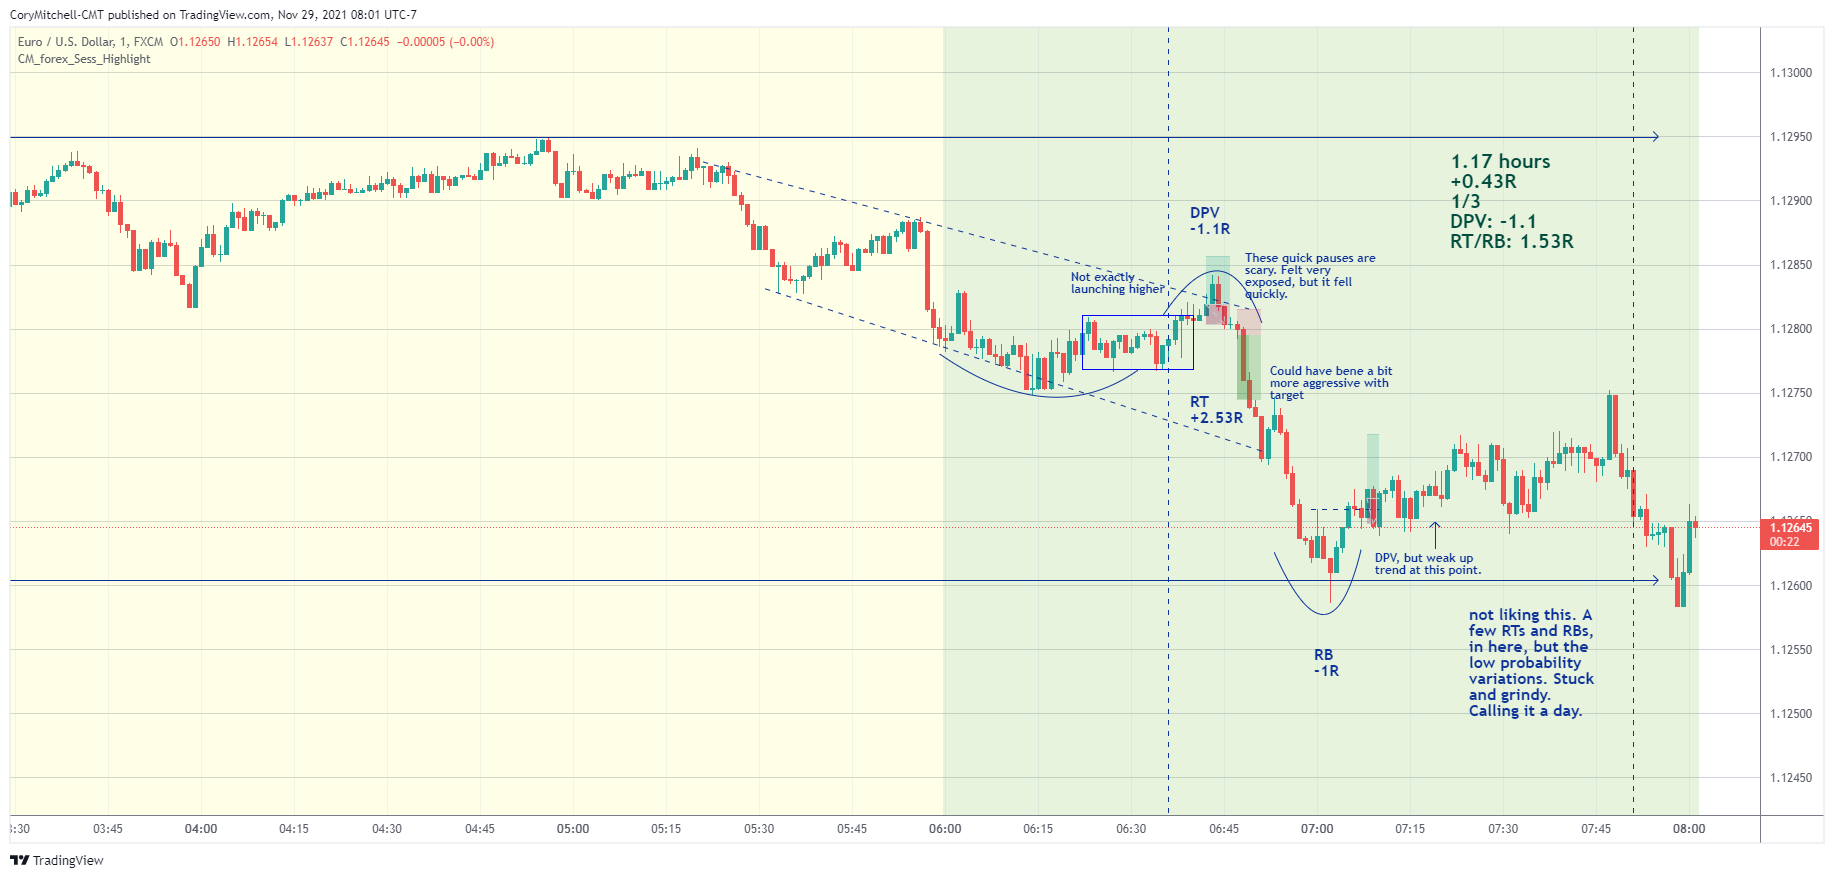 EURUSD day trading examples on 1-minute chart Nov. 29